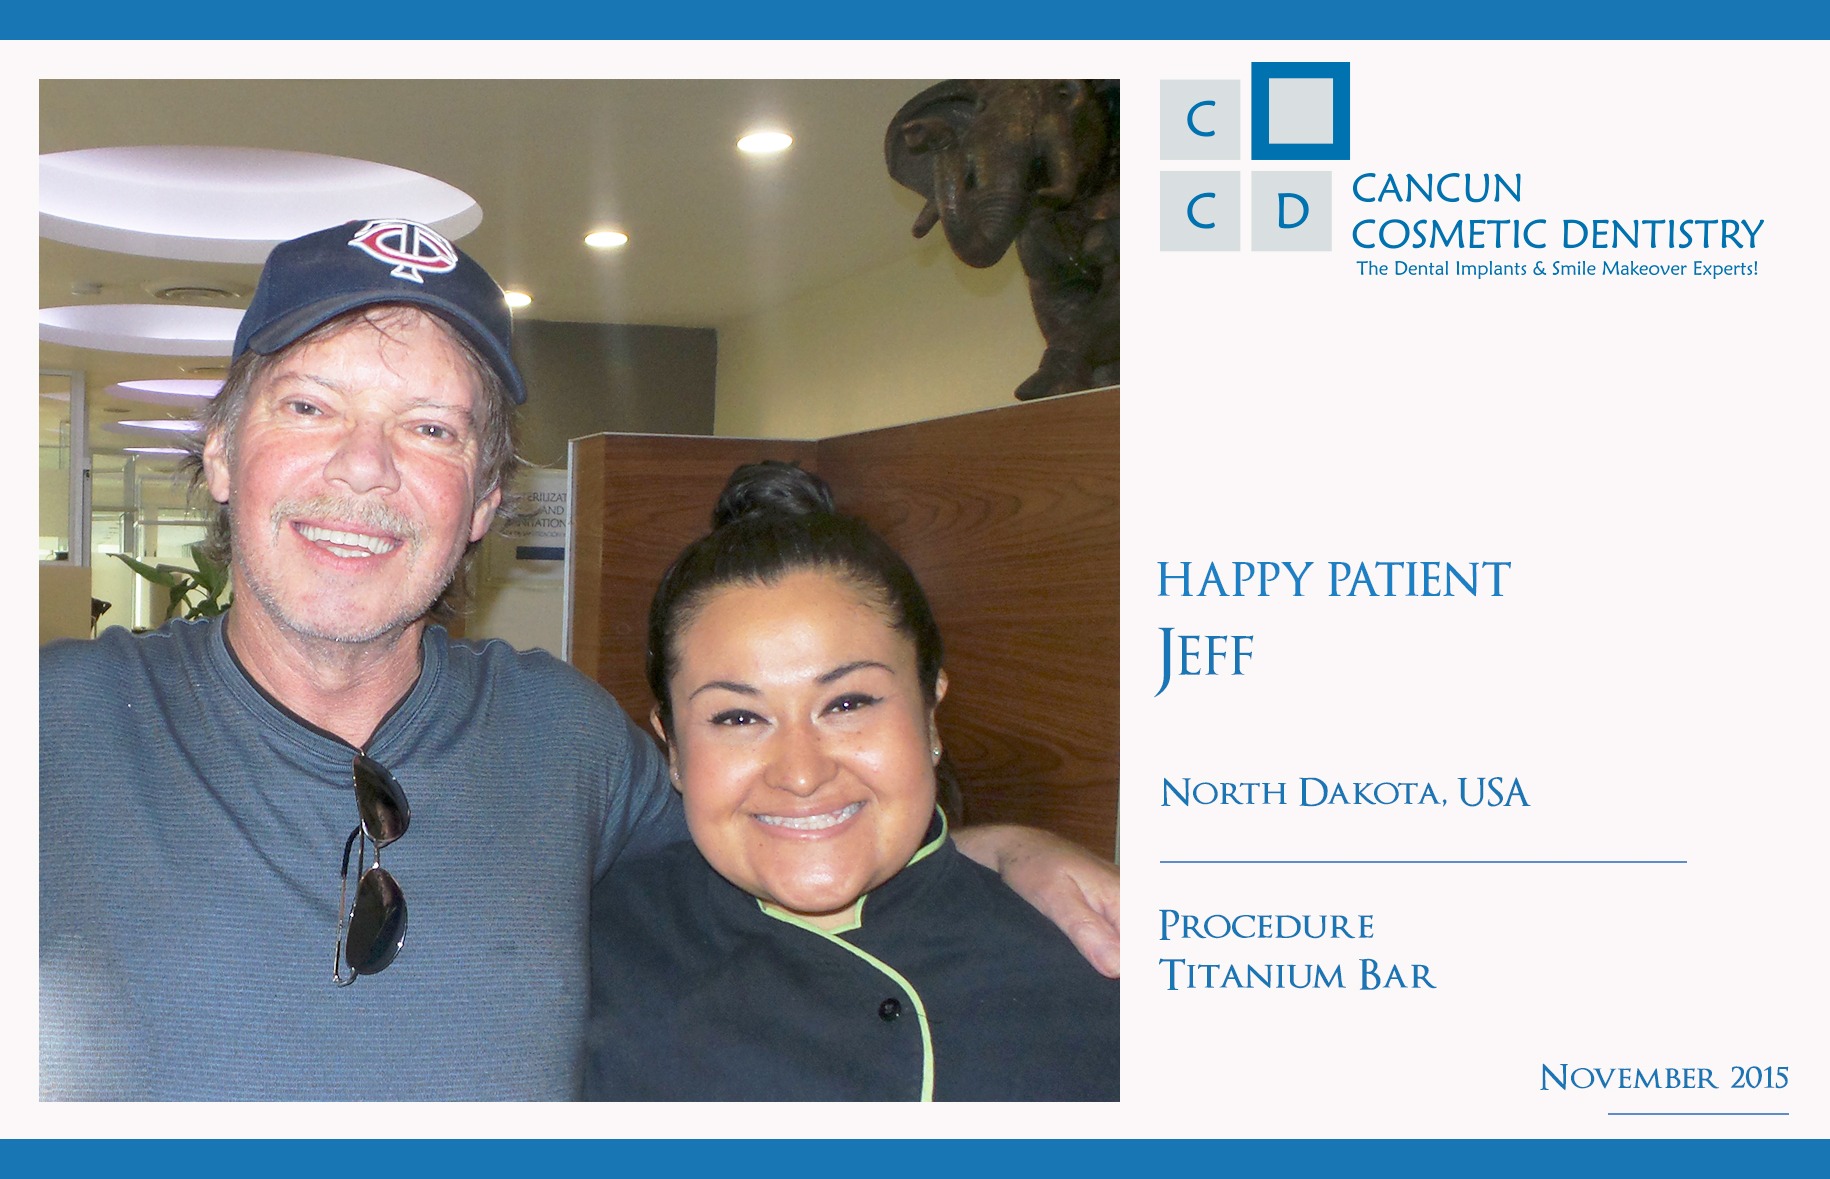 Good review of dentists in Cancun Cosmetic Dentistry